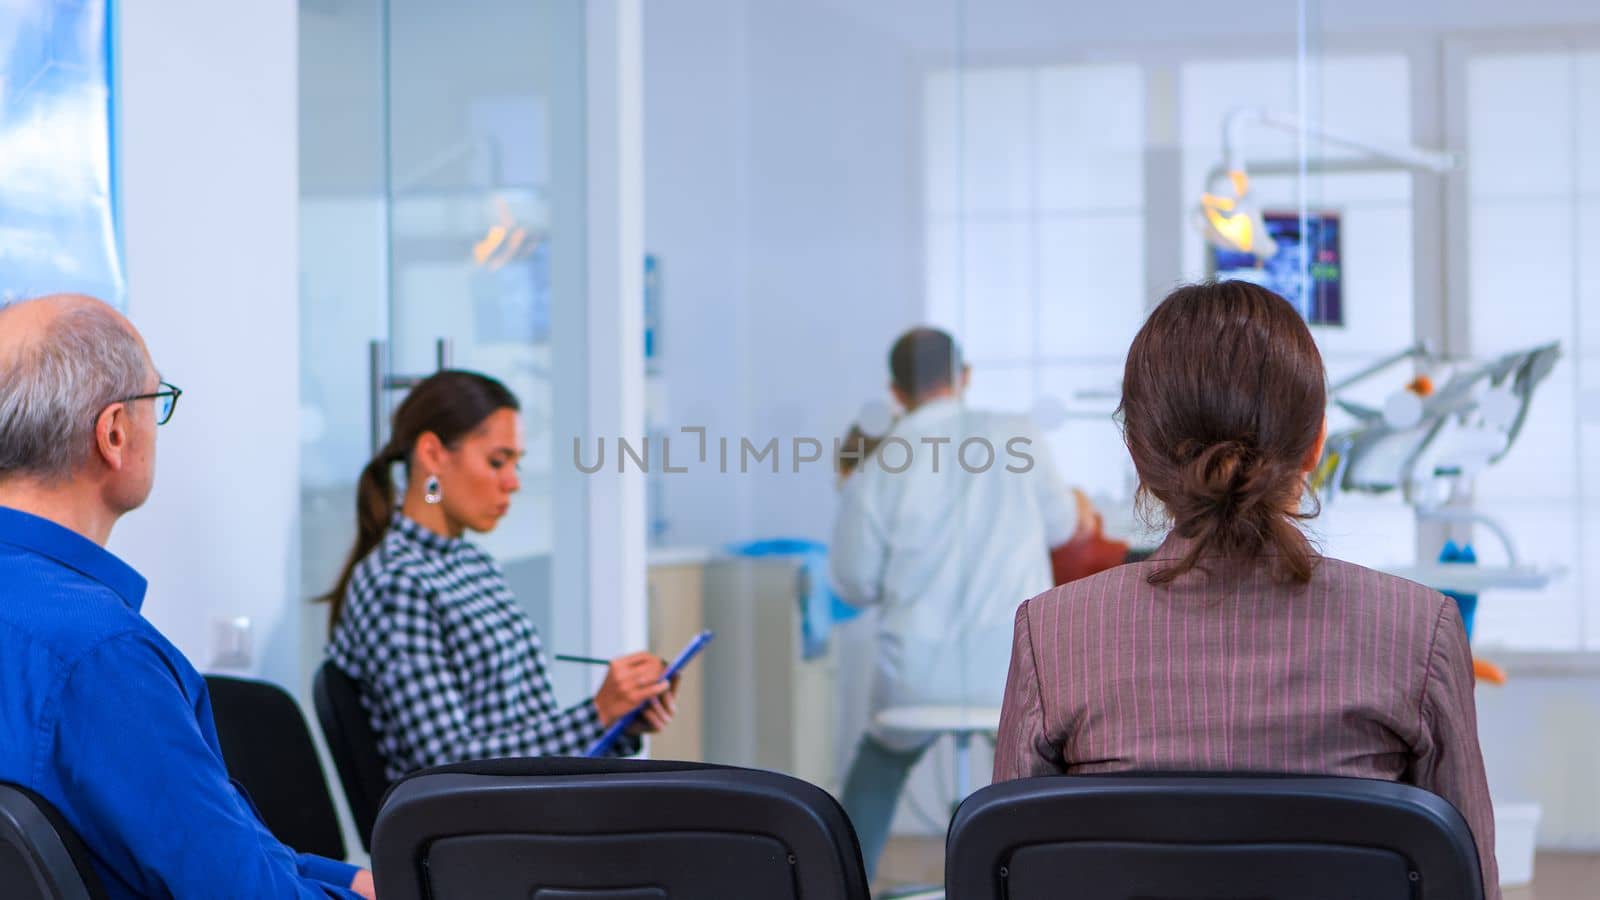 Back view of woman filling in dental form sitting on chiar in waiting room preparing for dental implants while doctor exemination patient in background. Crowded professional orthodontist office.